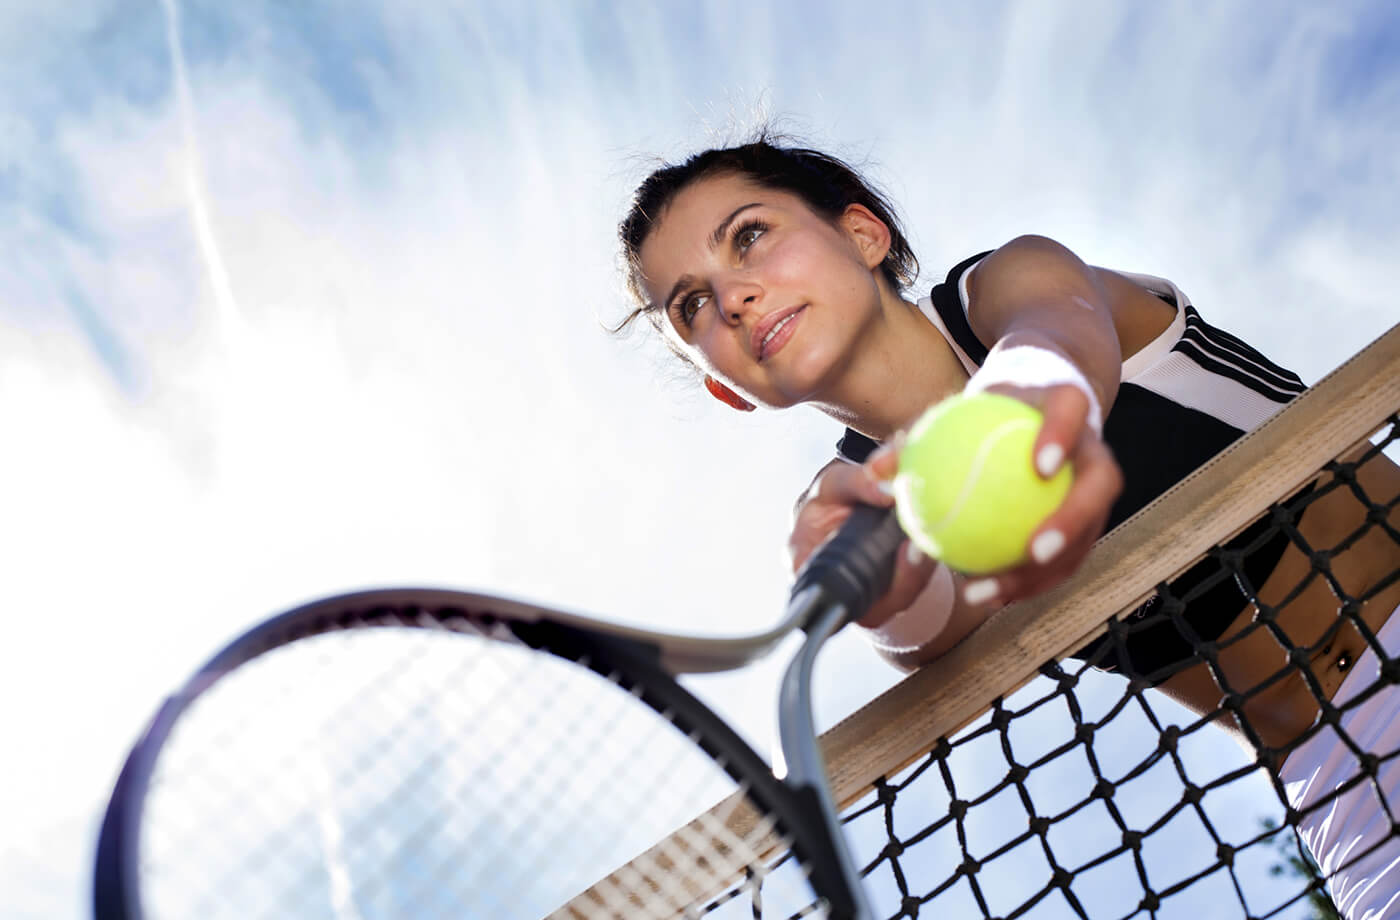 tennis player leaning over the net